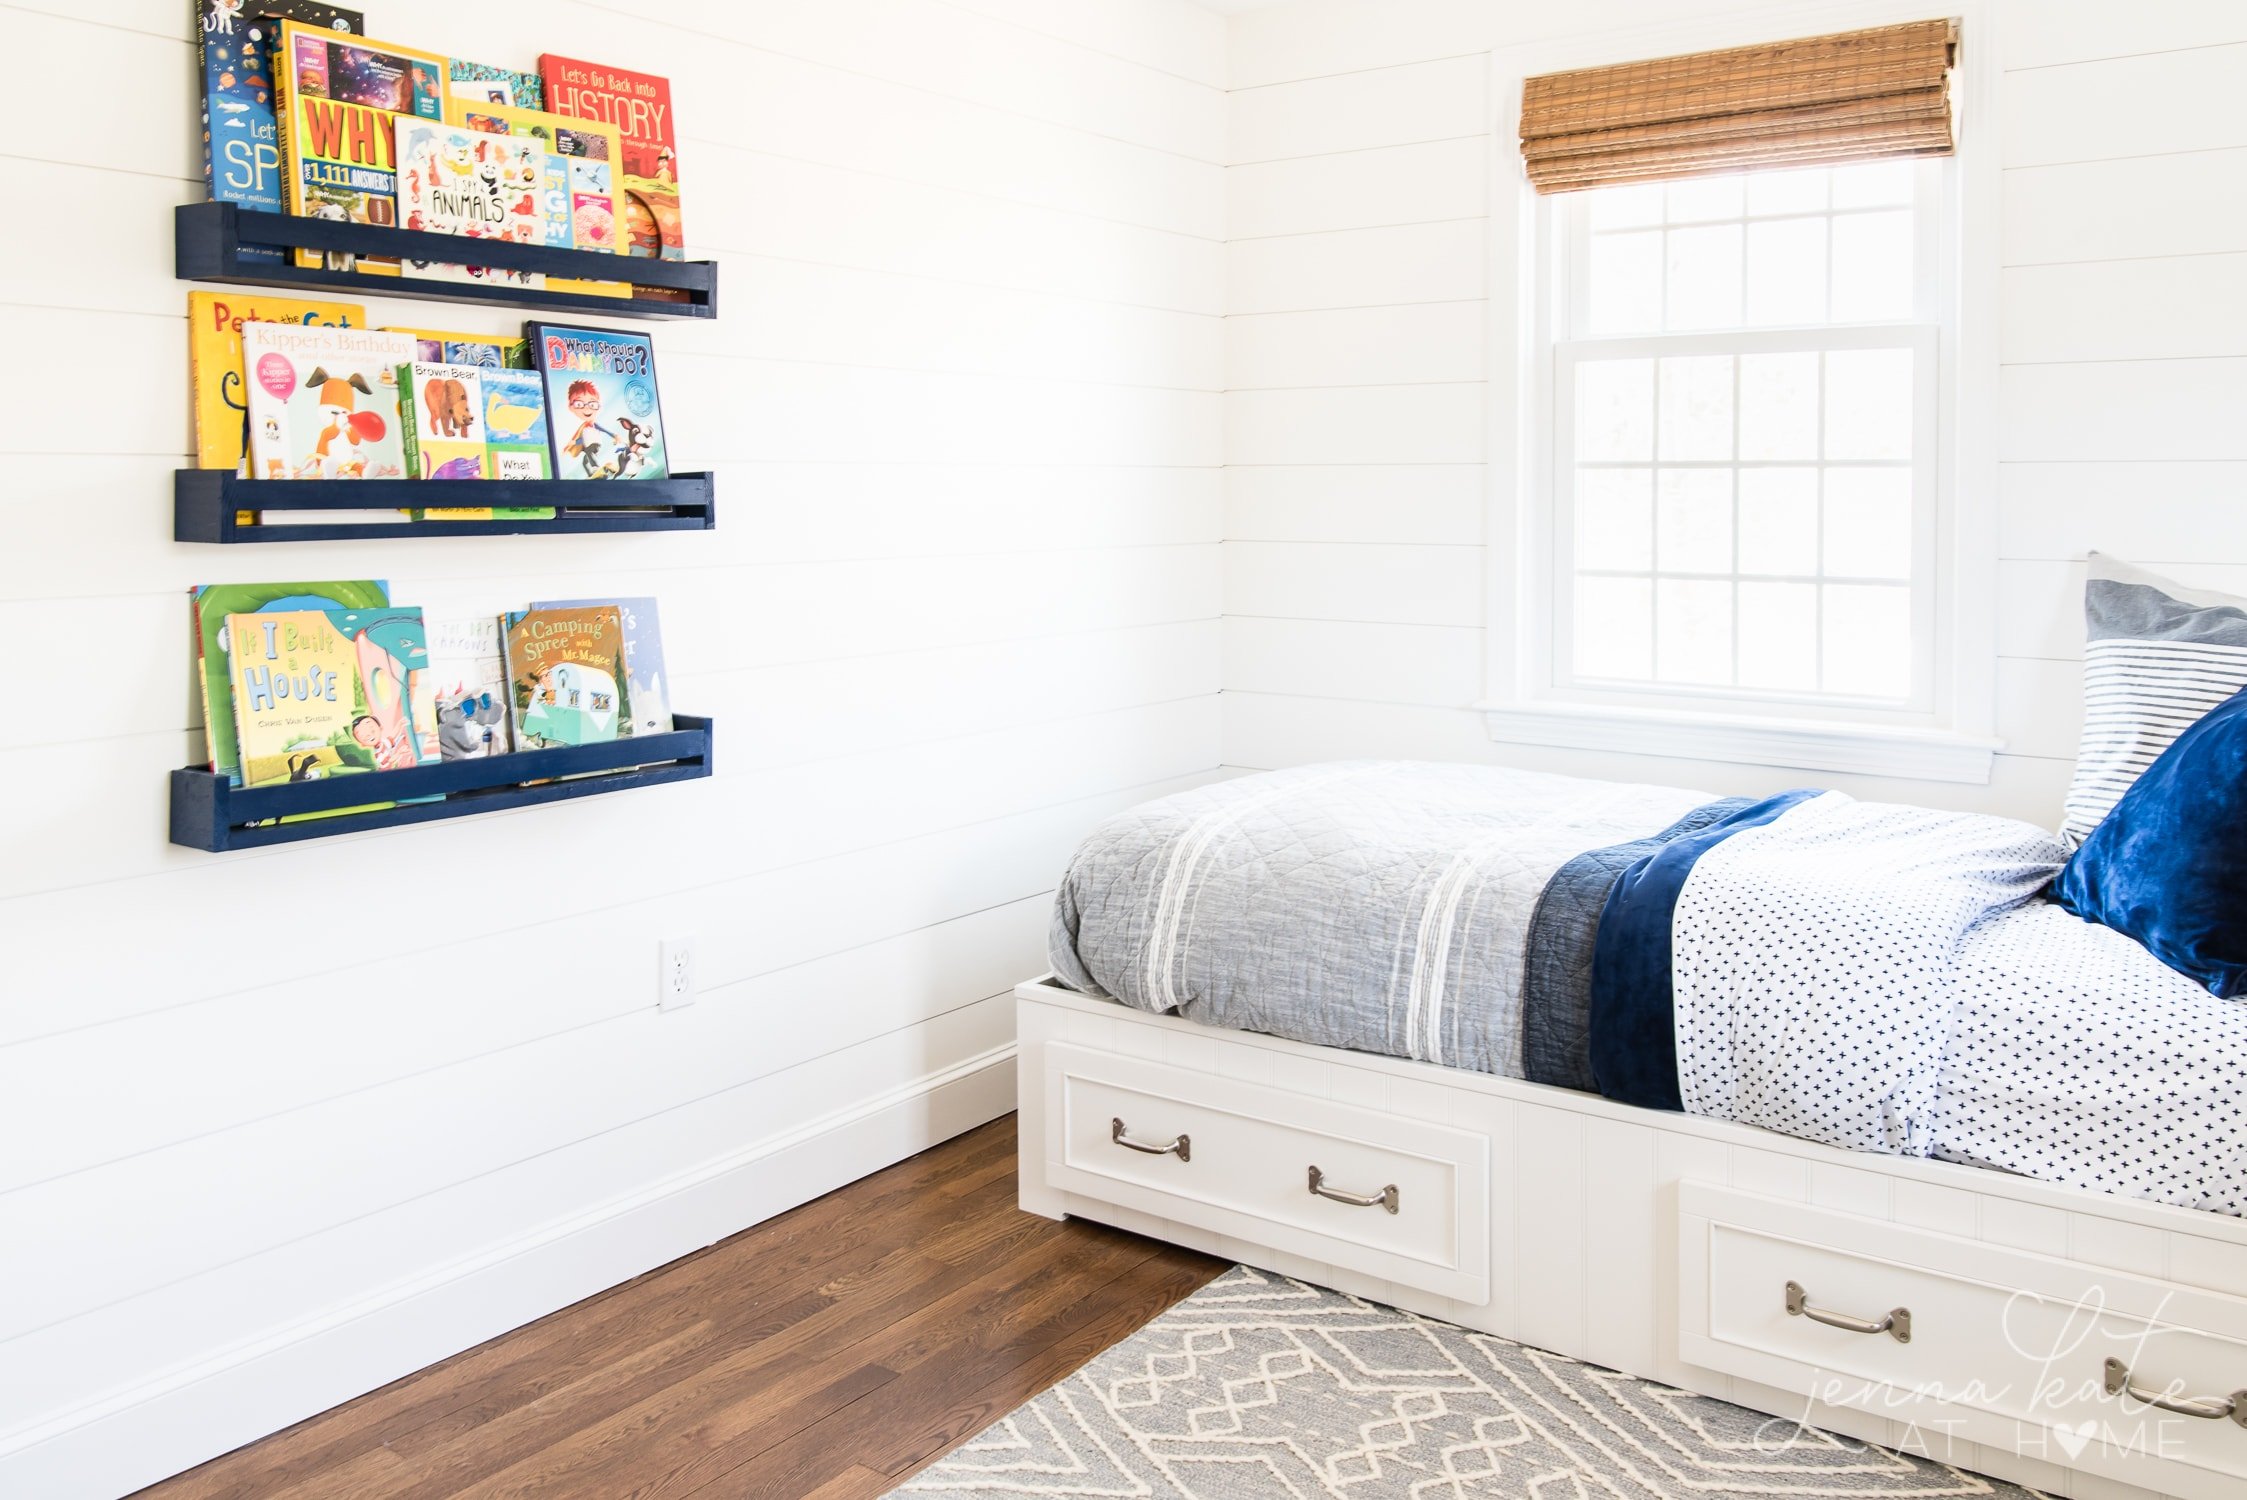 Pottery Barn Kids Belden Bed with shiplap walls, bamboo shades, book ledges on the wall and patterned boy bedding. Perfect for a shared boy bedroom.